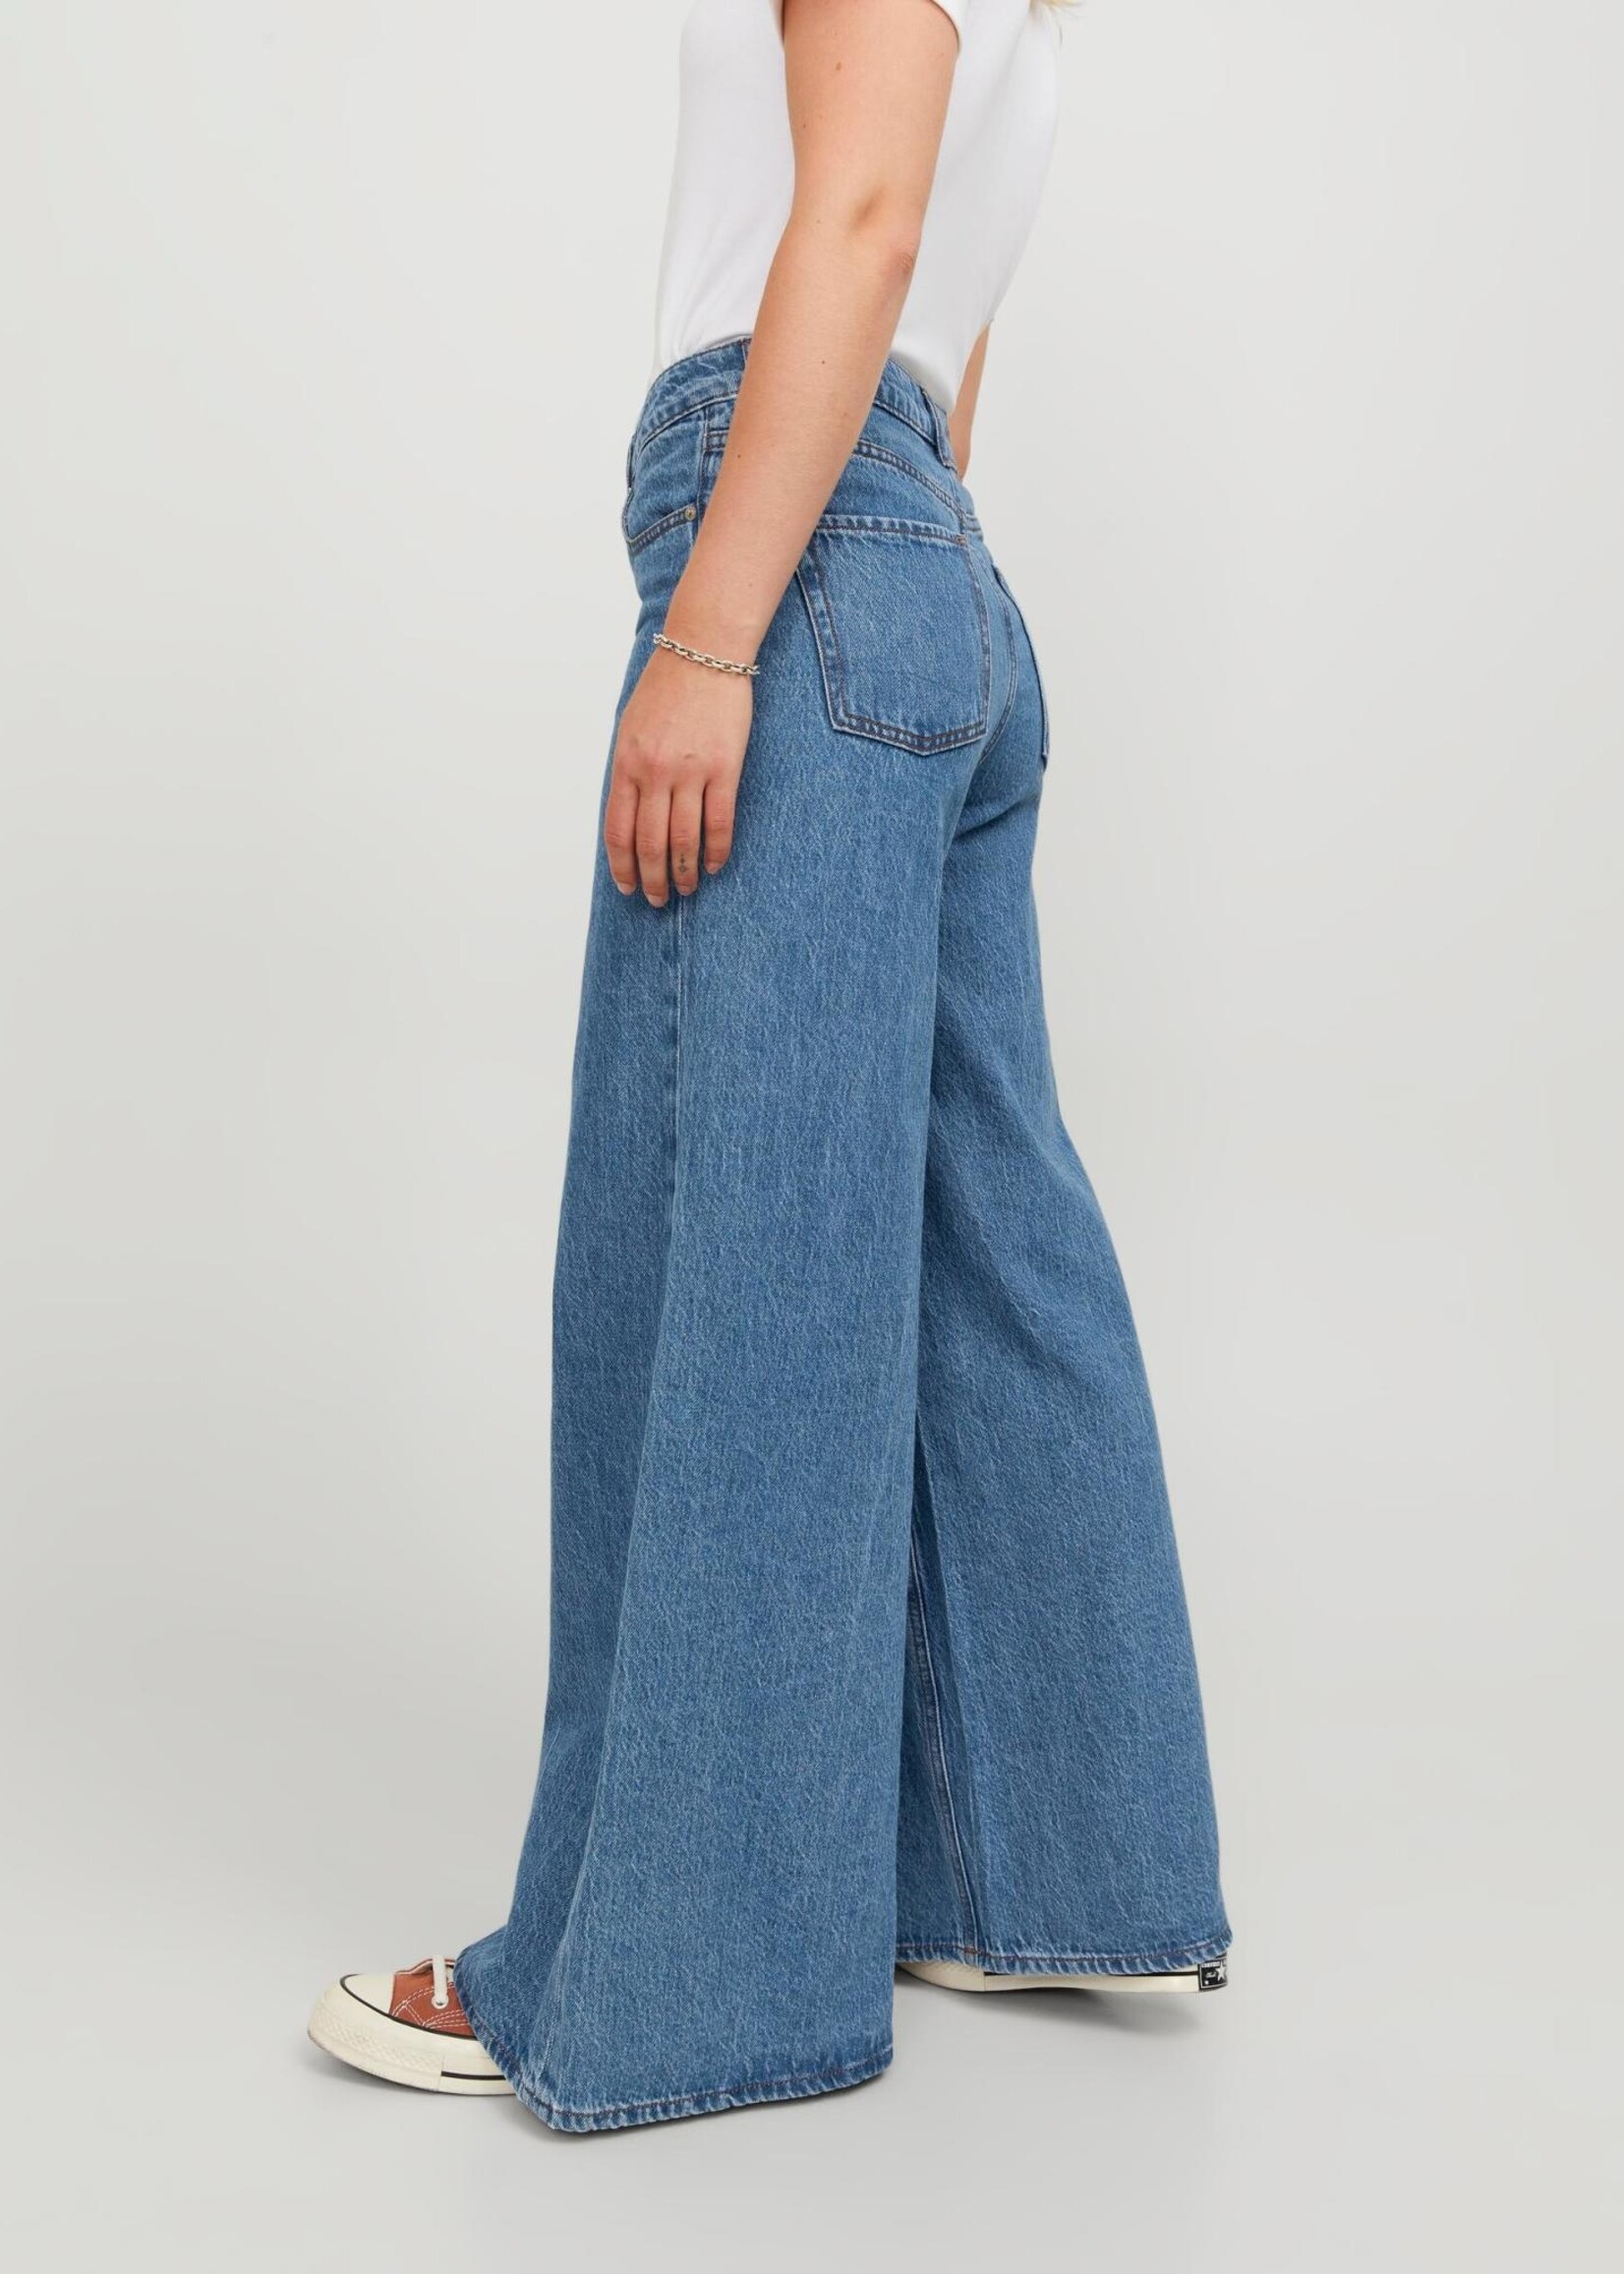 JXBREE EXTRA WIDE PANTS R062 - MED BLUE